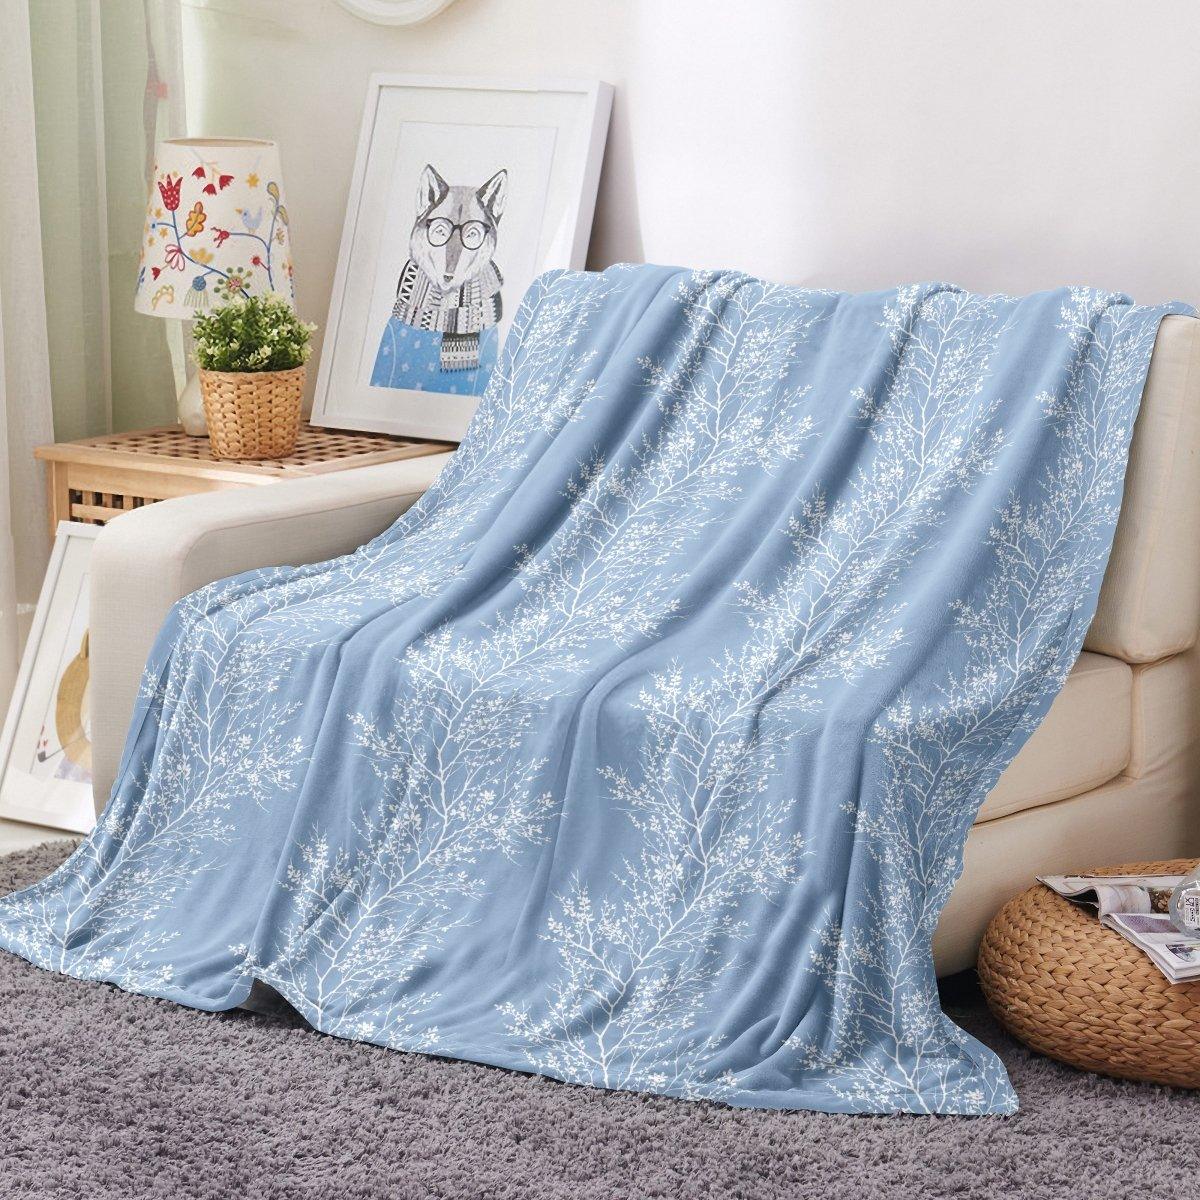 Ultra Soft Oversized Plush Foliage Throw Blanket - Stylish Home Décor for Bed or Couch - Spirit Linen